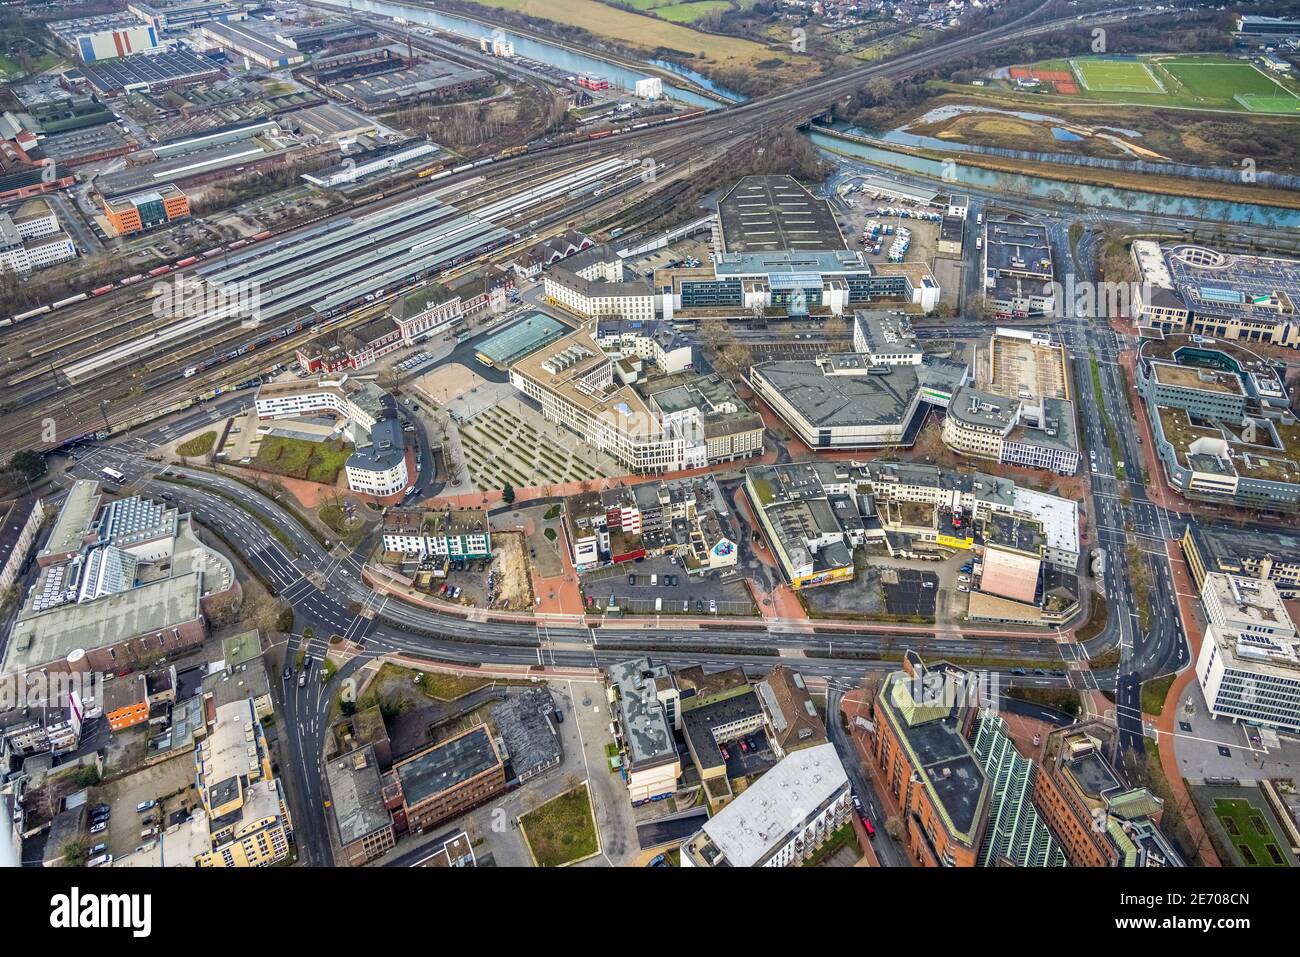 Aerial view of city center commercial buildings Bahnhofstraße in Hamm, Ruhr area, North Rhine-Westphalia, Germany, railroad tracks, train station, fed Stock Photo